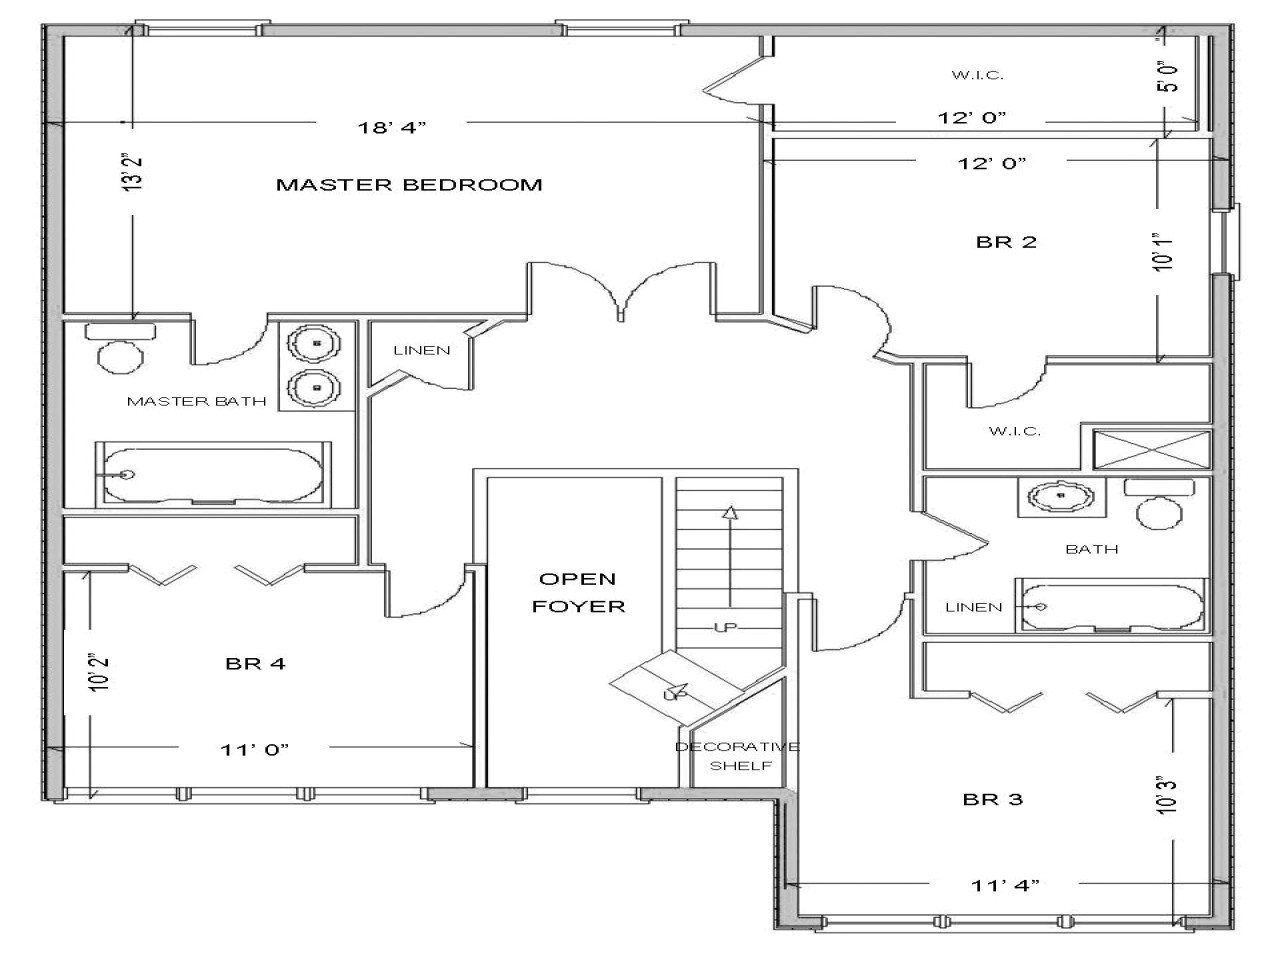 107977e8b1958155 simple small house floor plans free house floor plan layouts